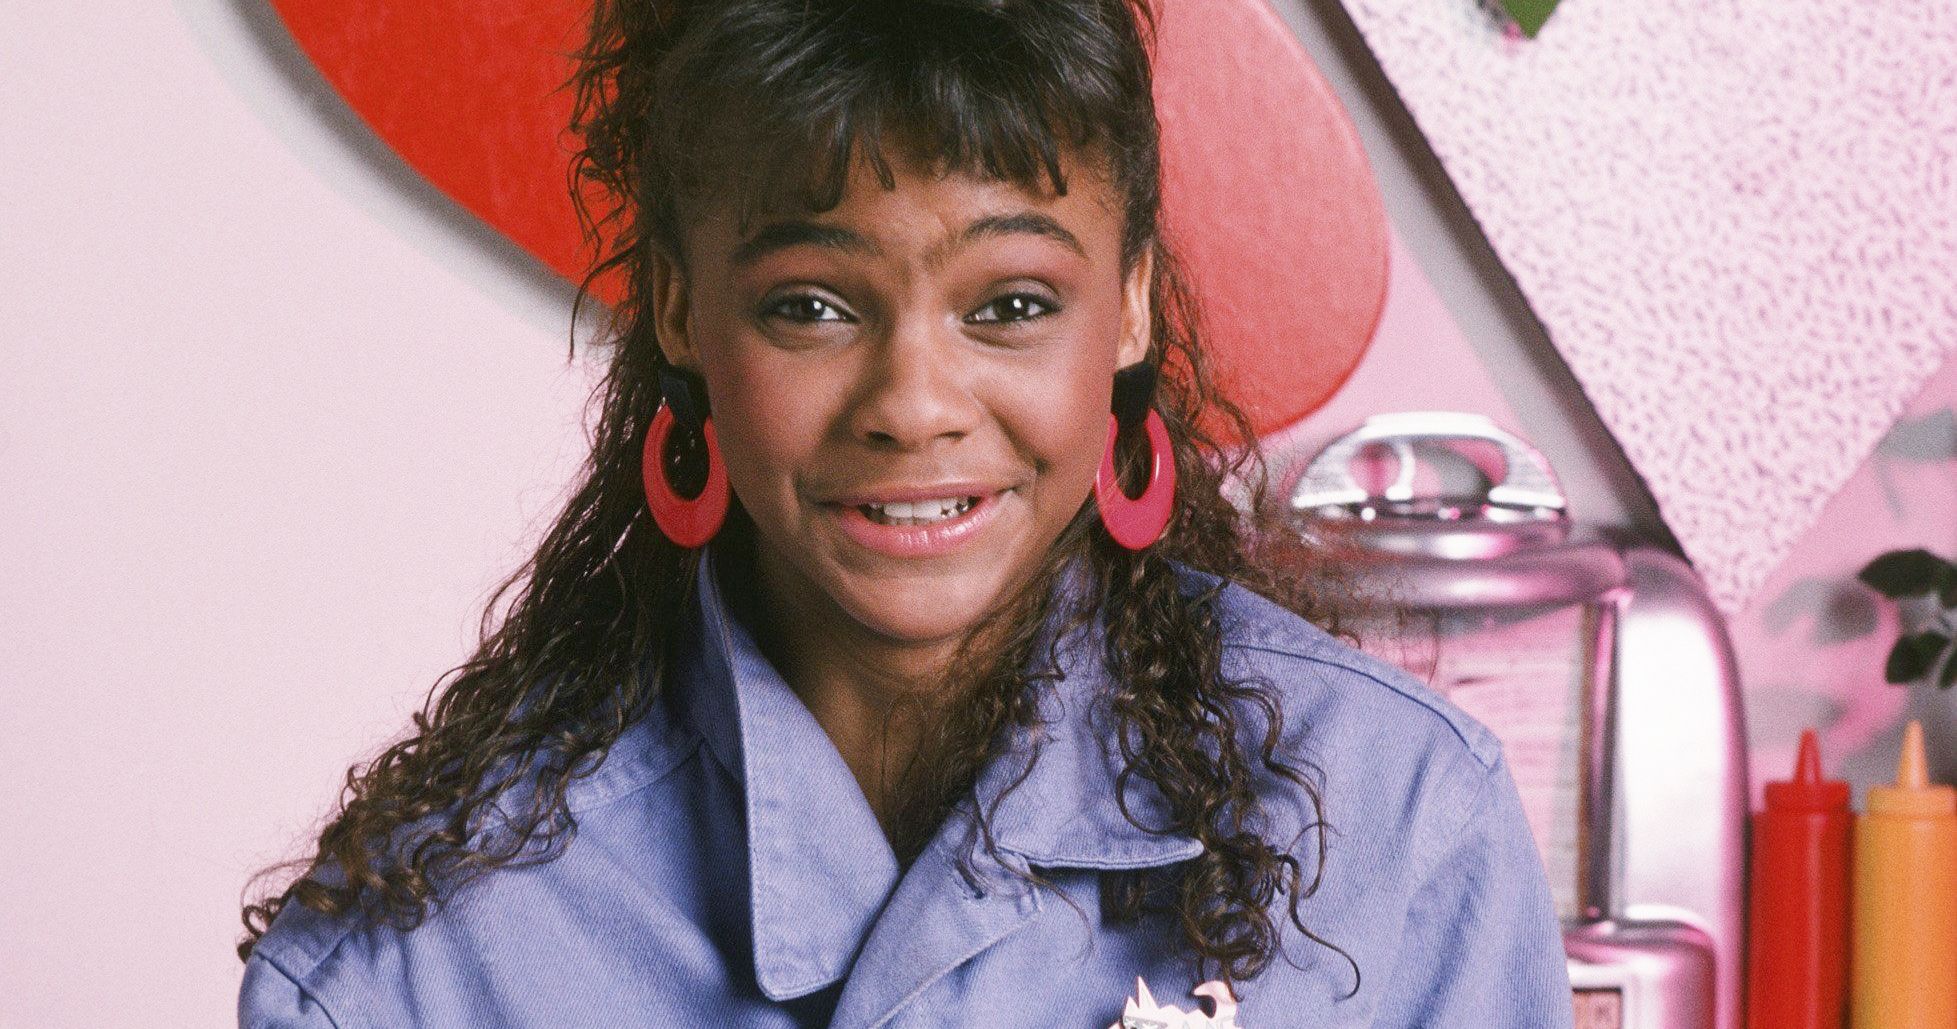 Saved by the Bell Reboot Exclusion Left Lark Voorhies Feeling Slighted and Hurt